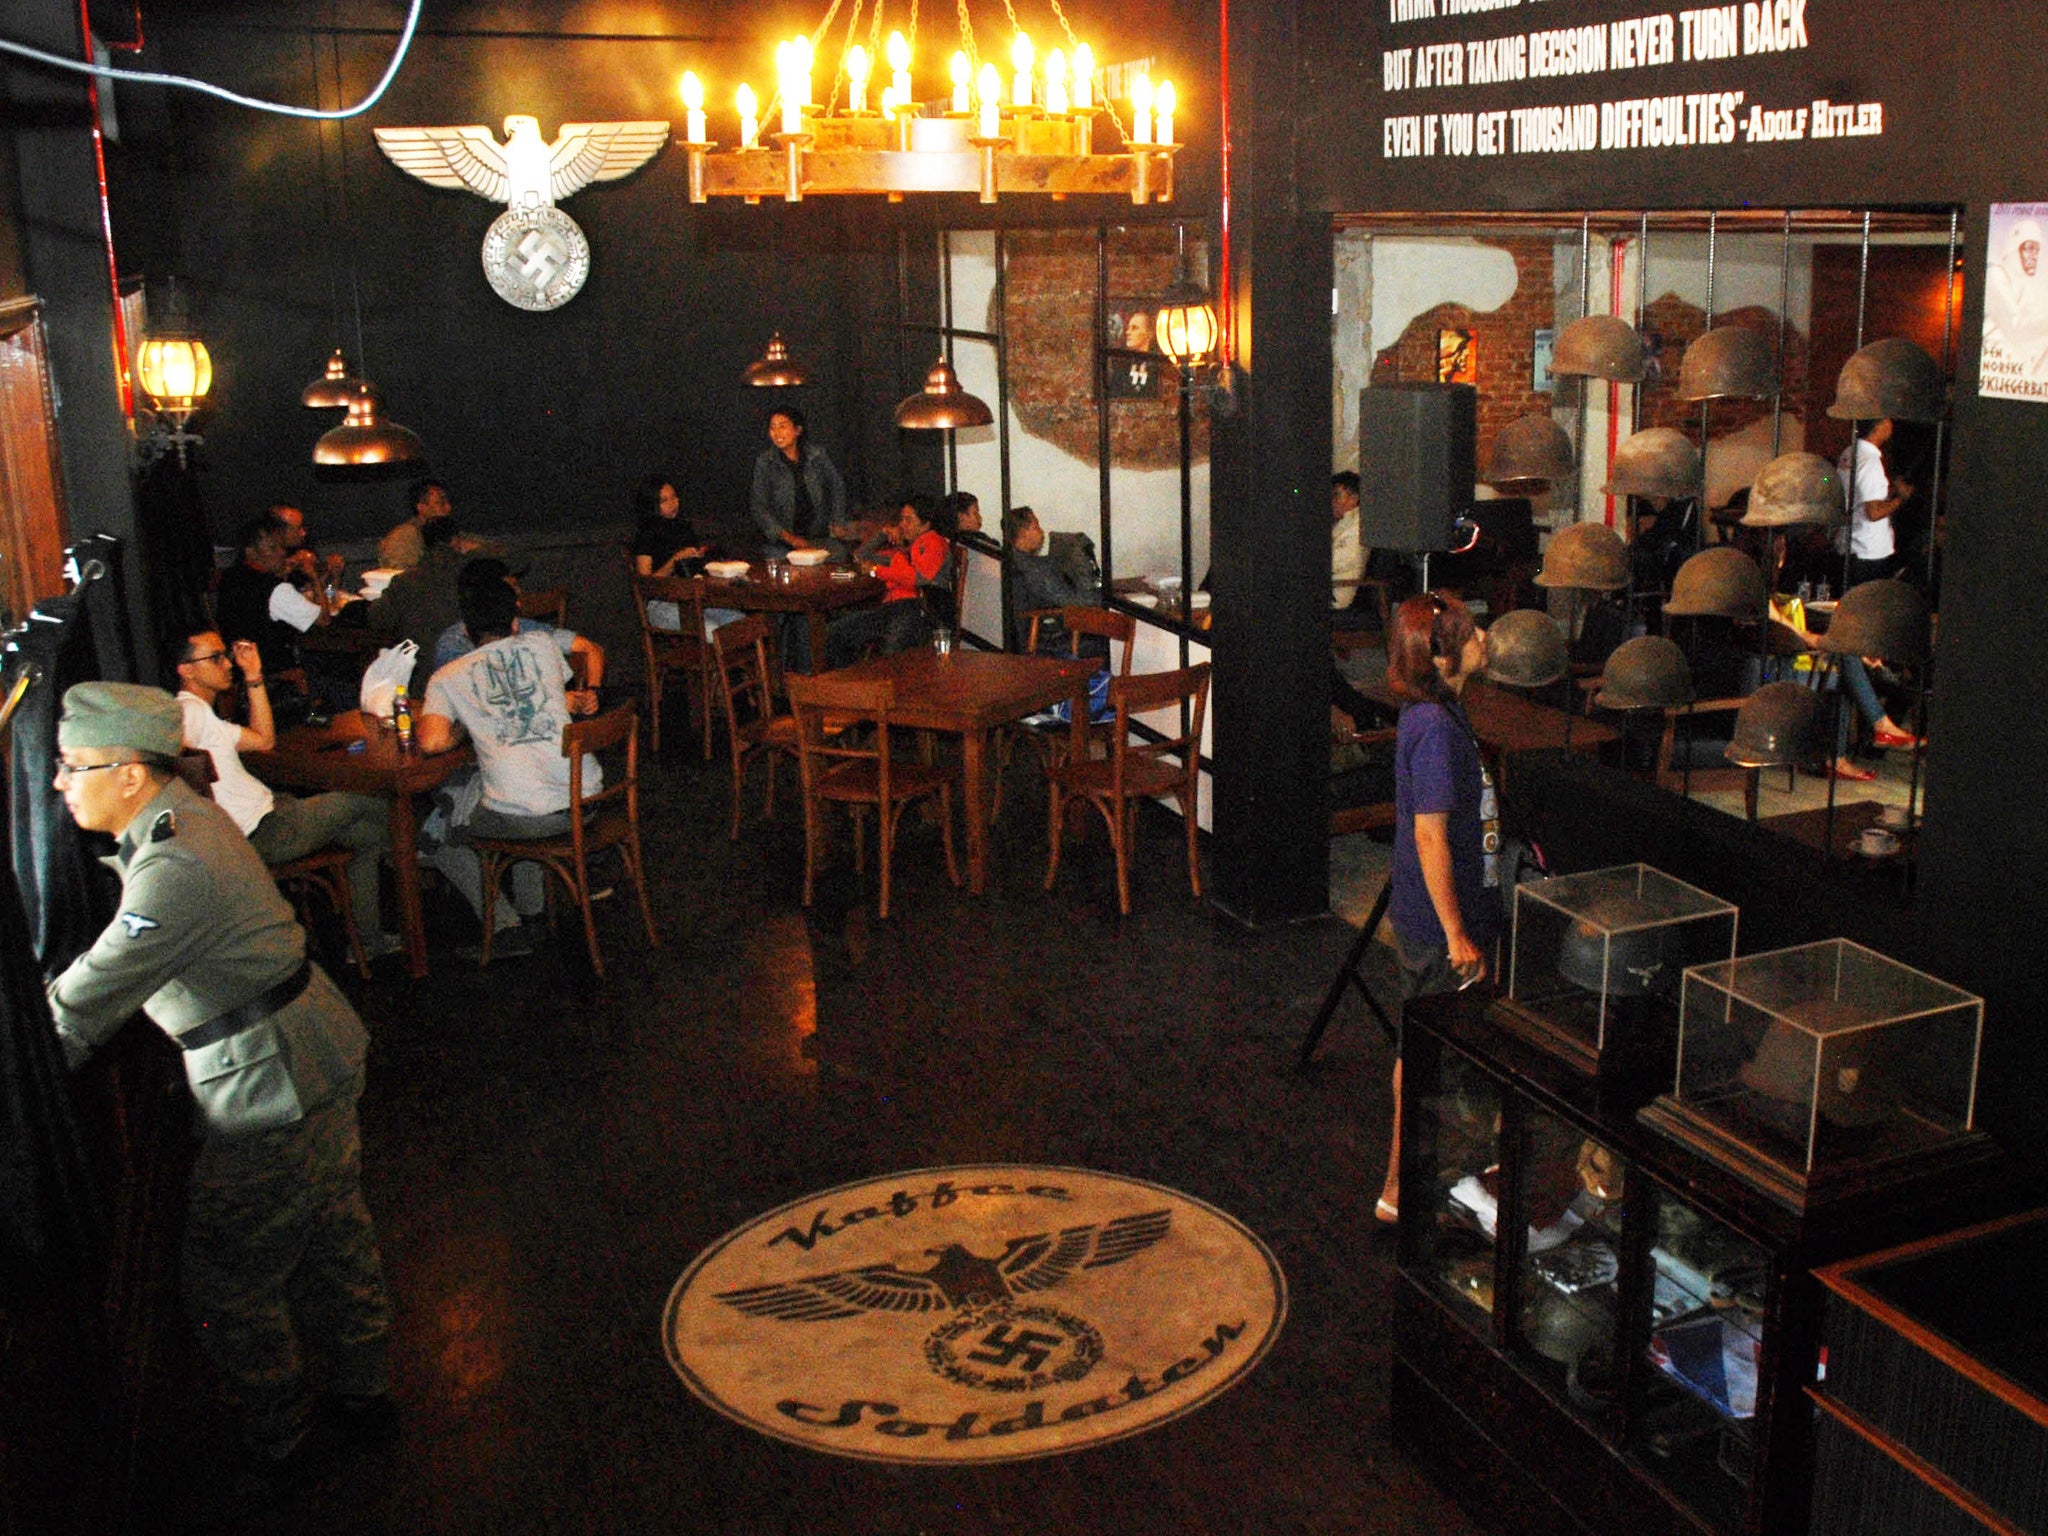 Nazithemed café in Indonesia reopens — keeping the